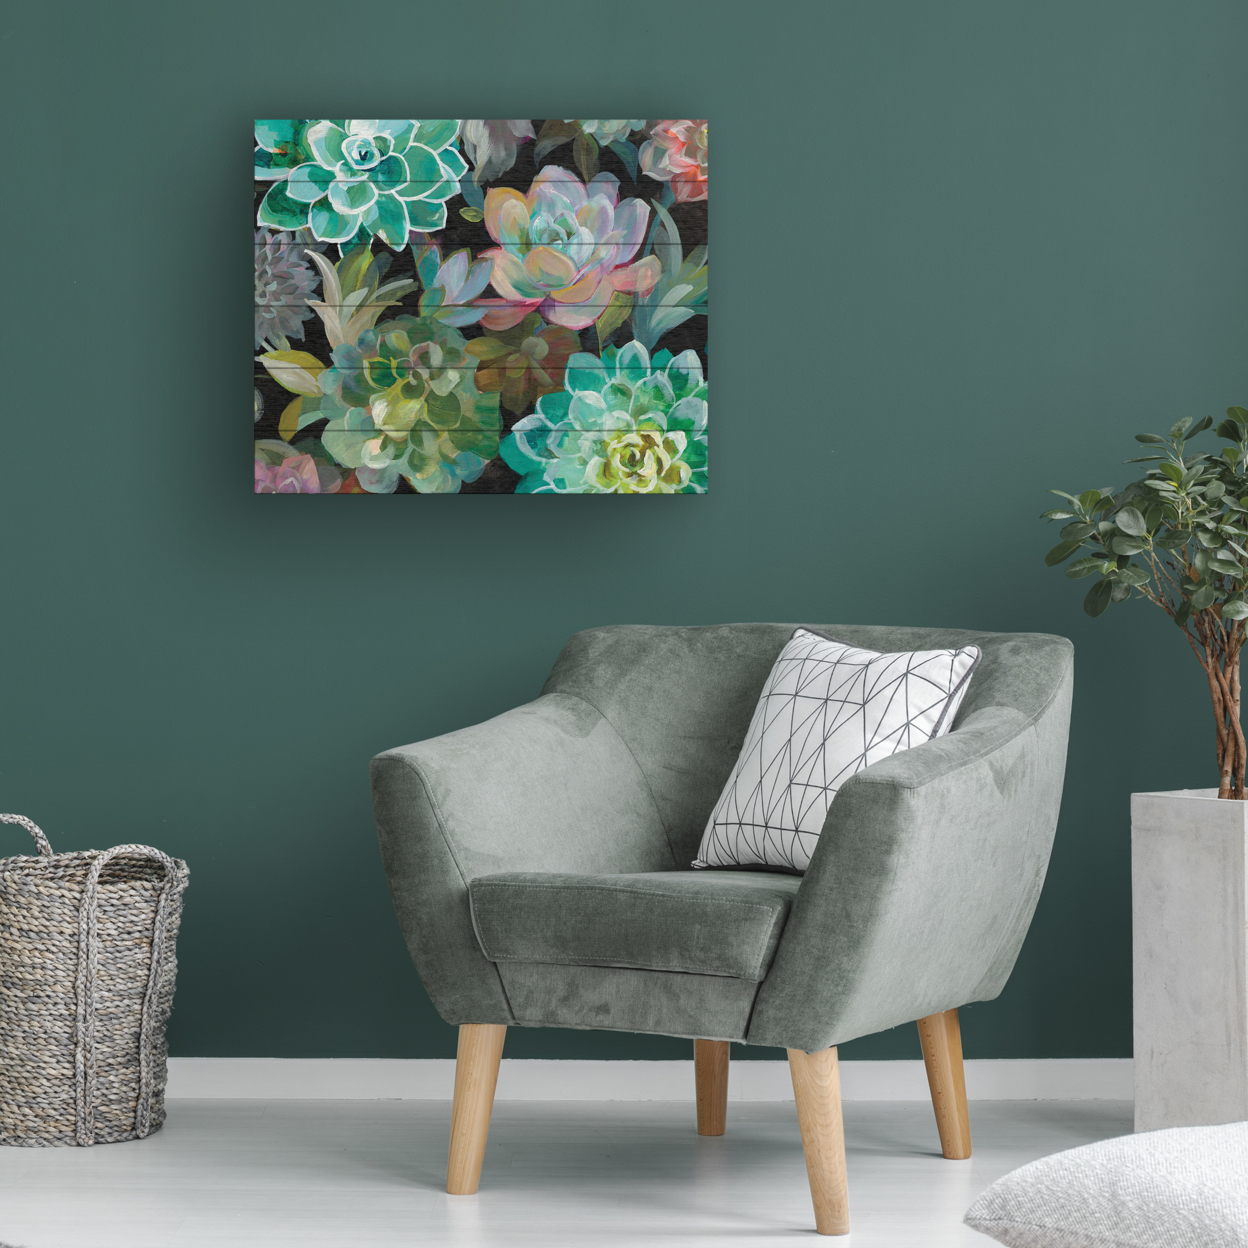 Wooden Slat Art 18 X 22 Inches Titled Floral Succulents V2 Crop Ready To Hang Home Decor Picture